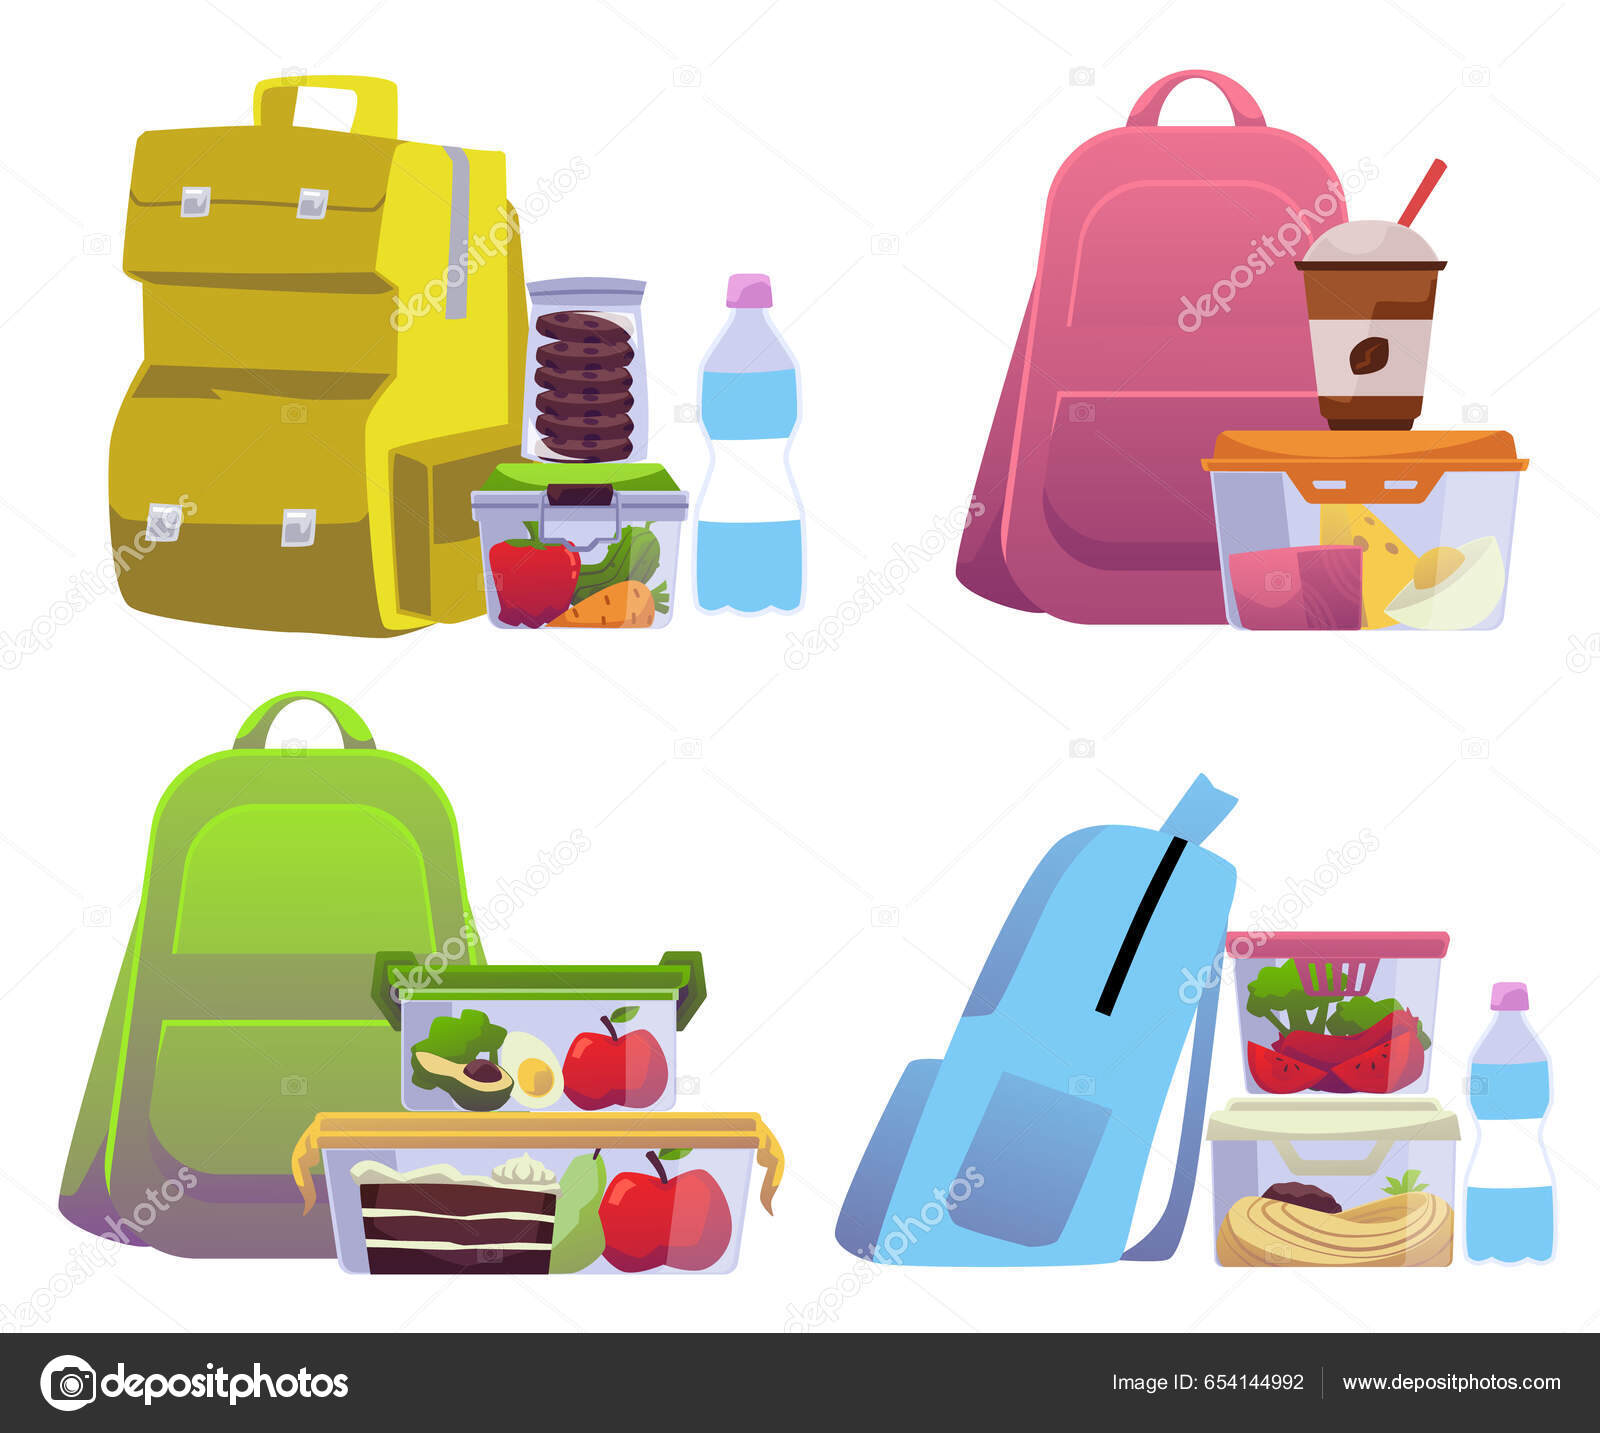 https://st5.depositphotos.com/1832477/65414/v/1600/depositphotos_654144992-stock-illustration-plastic-containers-packed-food-bags.jpg